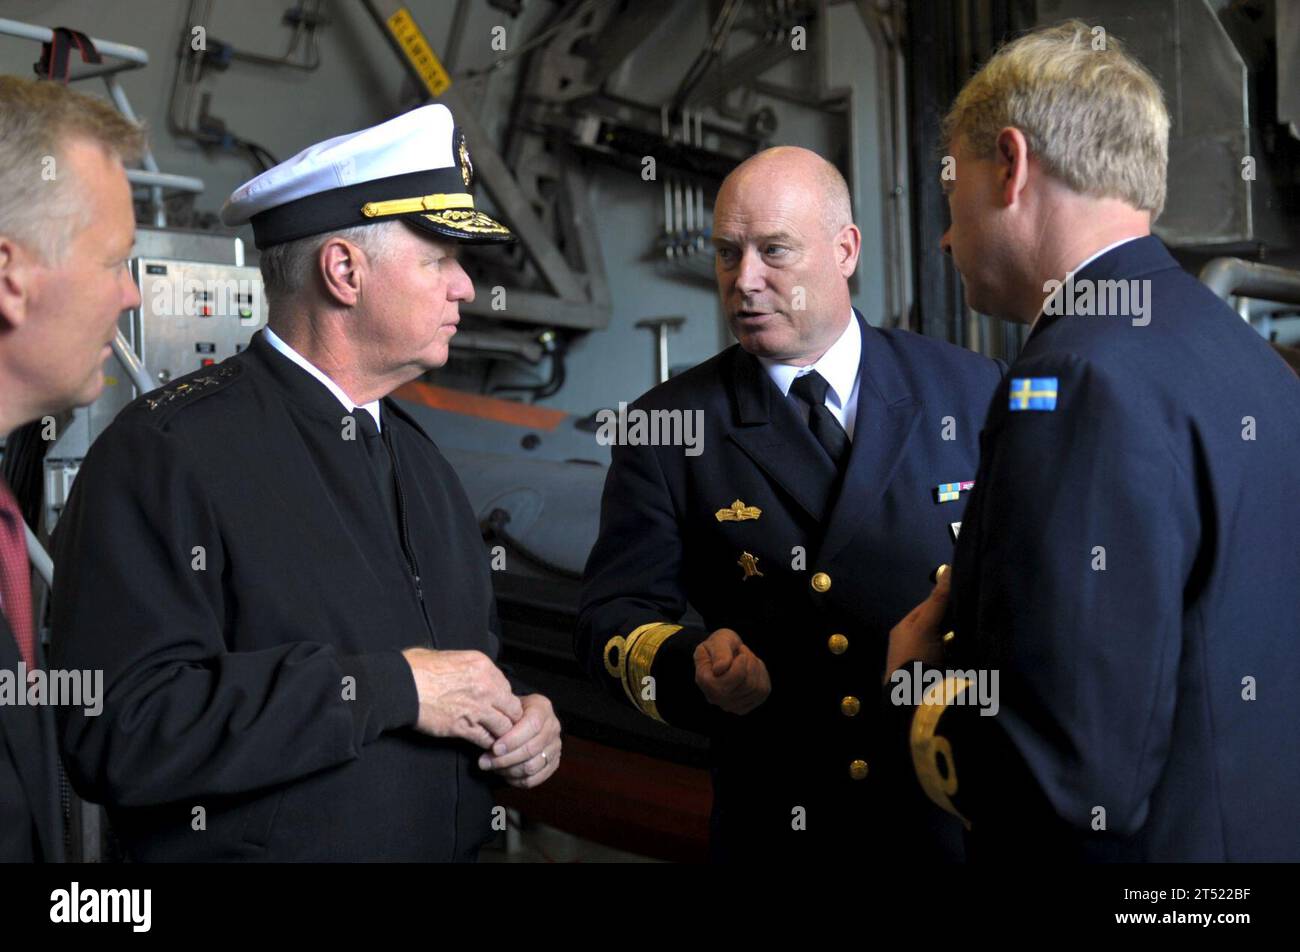 1008198273J-066 KARLSKRONA, Sweden (Aug. 19, 2010) Chief of Naval Operations (CNO) Adm. Gary Roughead, left, speaks with Rear Adm.  Anders Grenstad, Chief of Staff of the Royal Swedish Navy while aboard the Swedish Navy Visby Corvette HSwMS NYKOPING at Naval Base Karlskrona Naval Base.  Navy Stock Photo